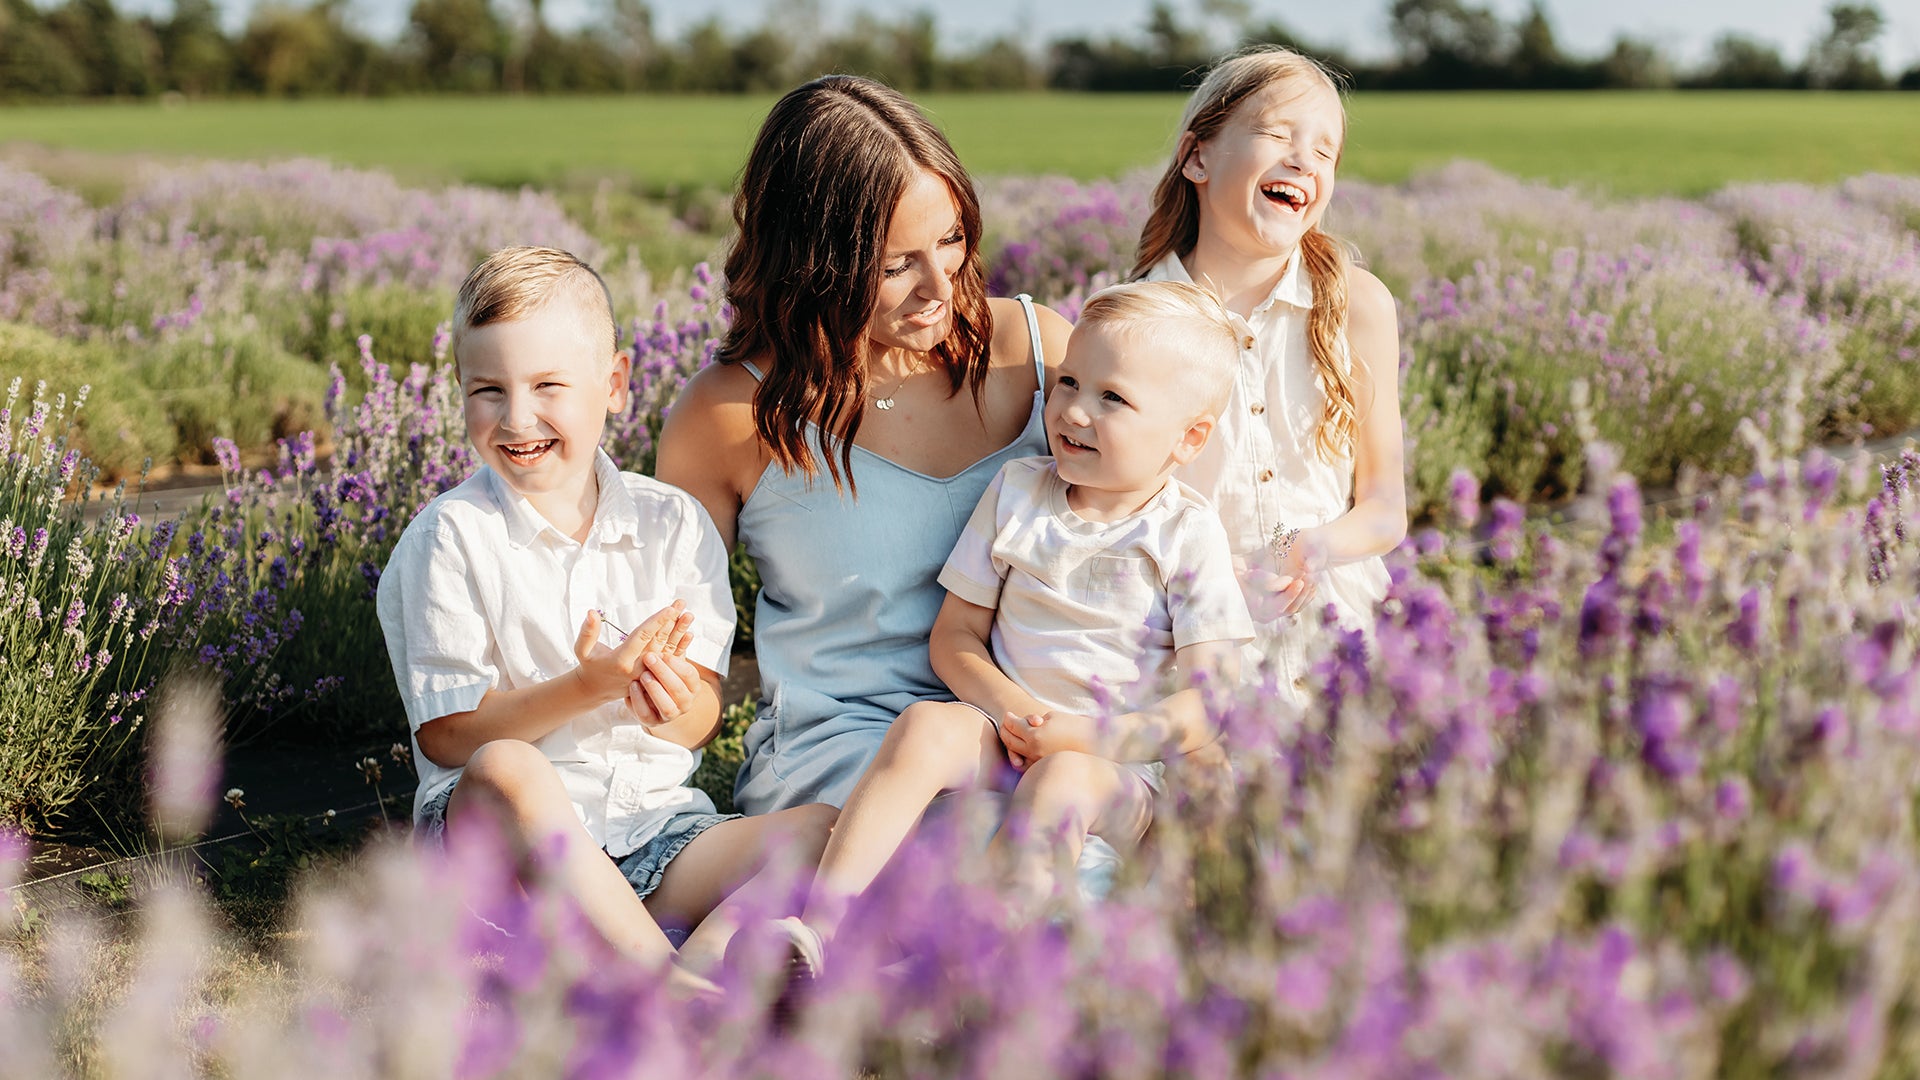 Three white children sit laughing and smiling with their Mom between rows of bright purple lavender